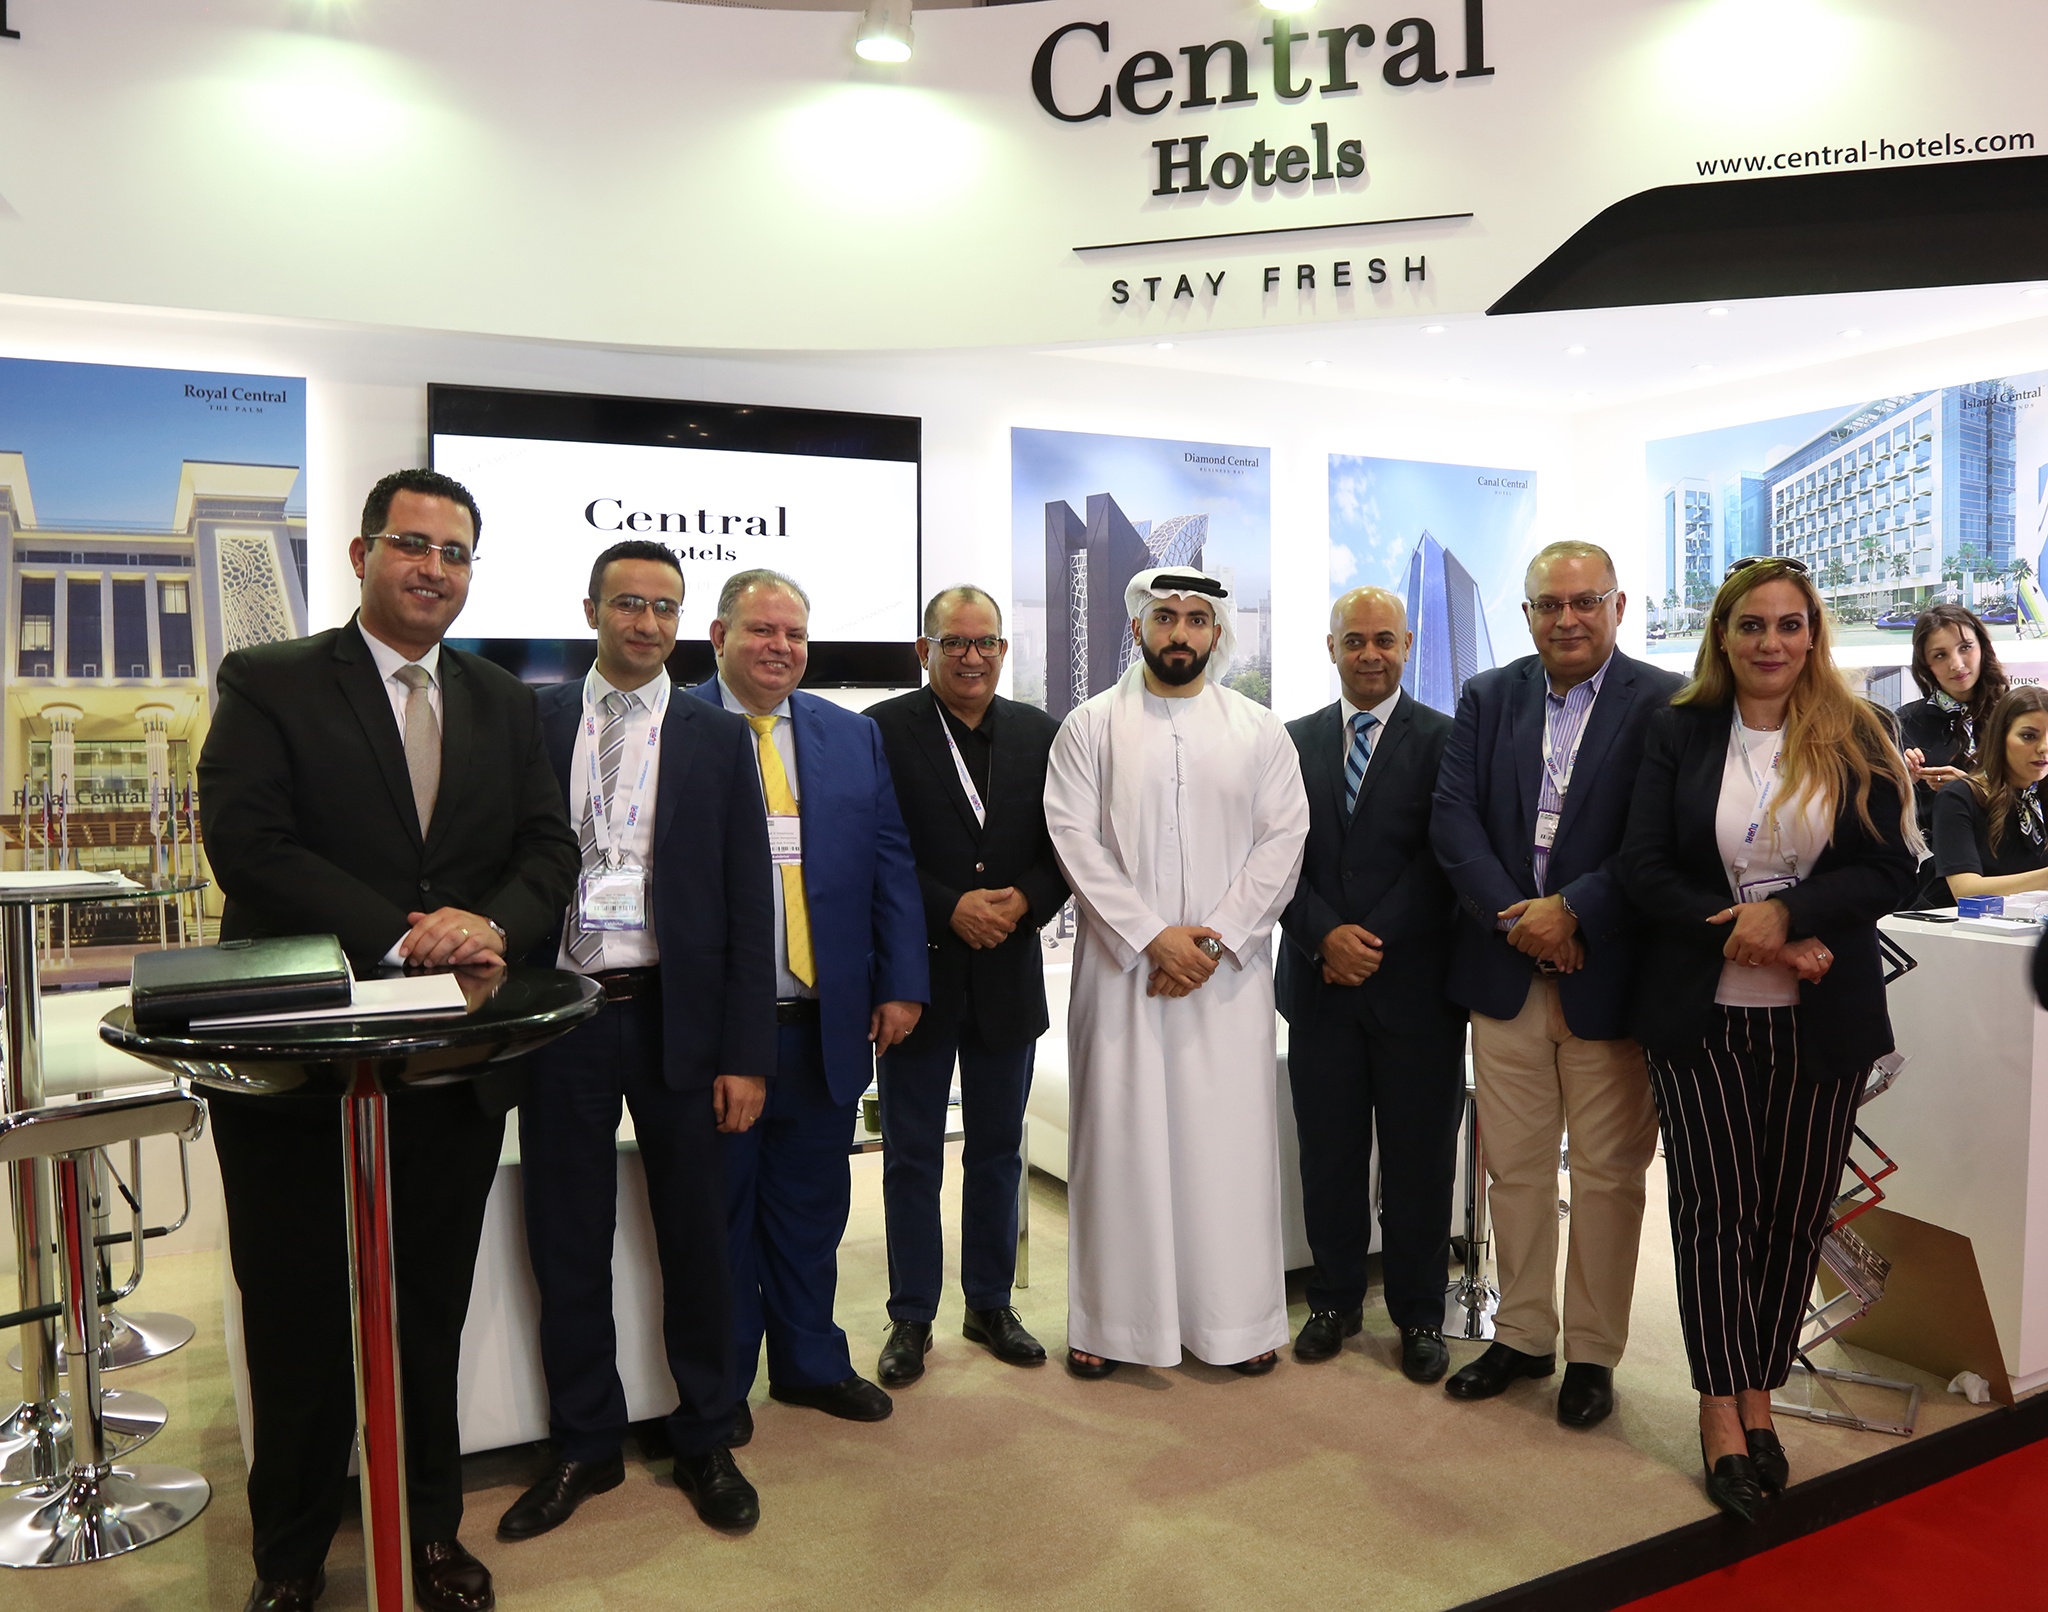 Mr. Abdulla Al Abdulla Chief Operating Officer for Central Hotels along with his team